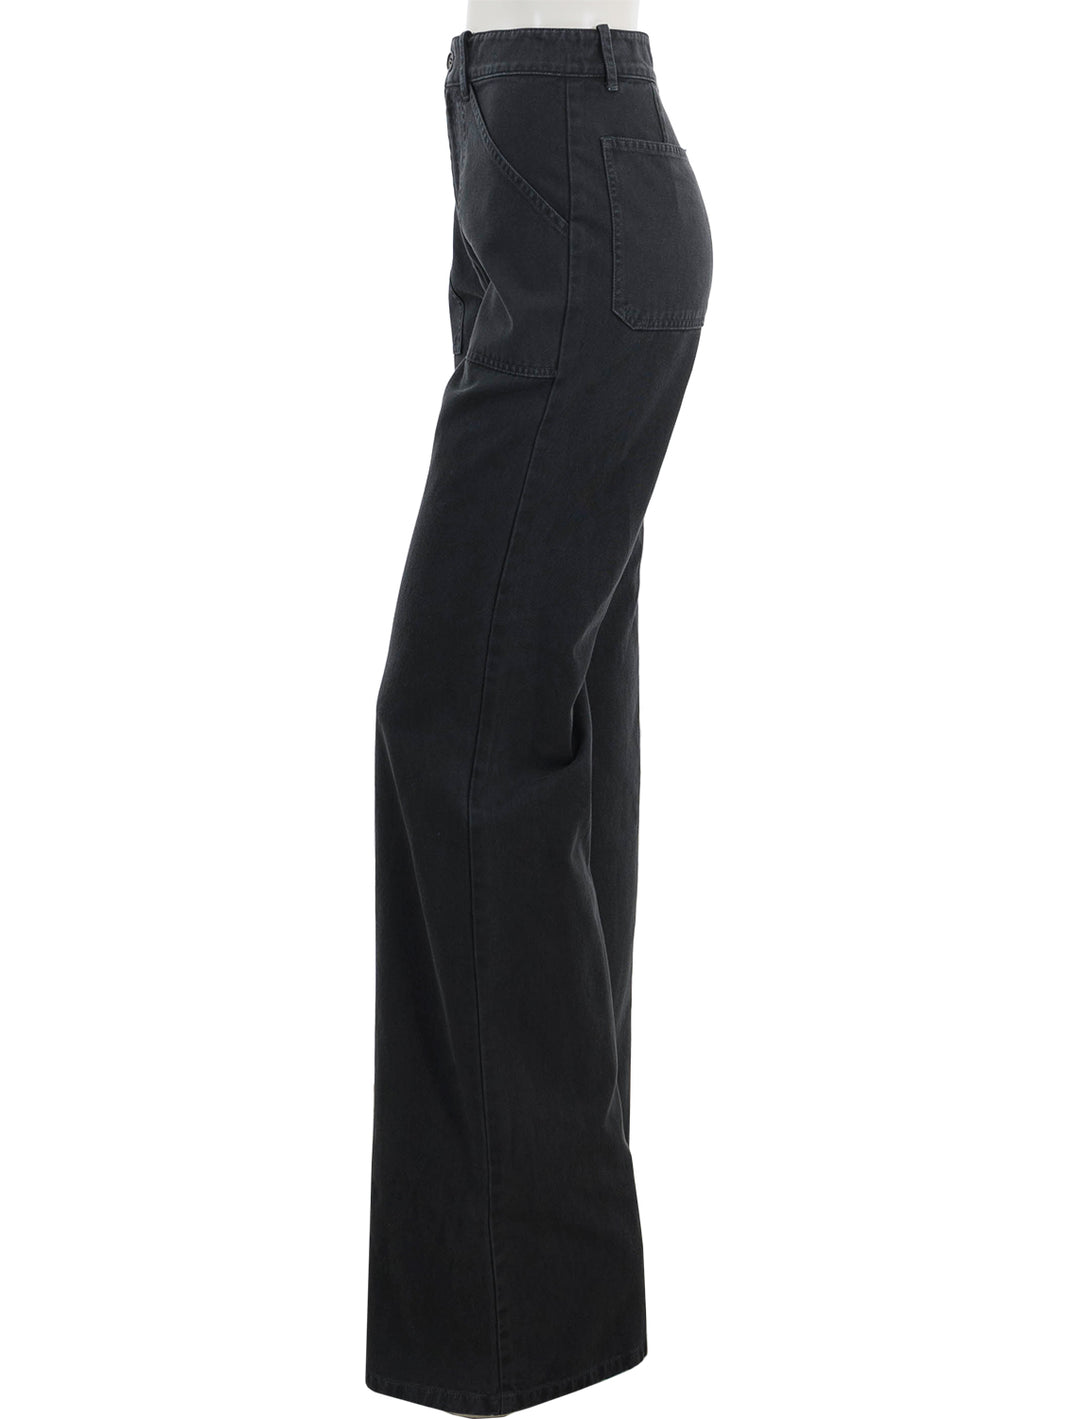 Side view of Nili Lotan's quentin pant in carbon.